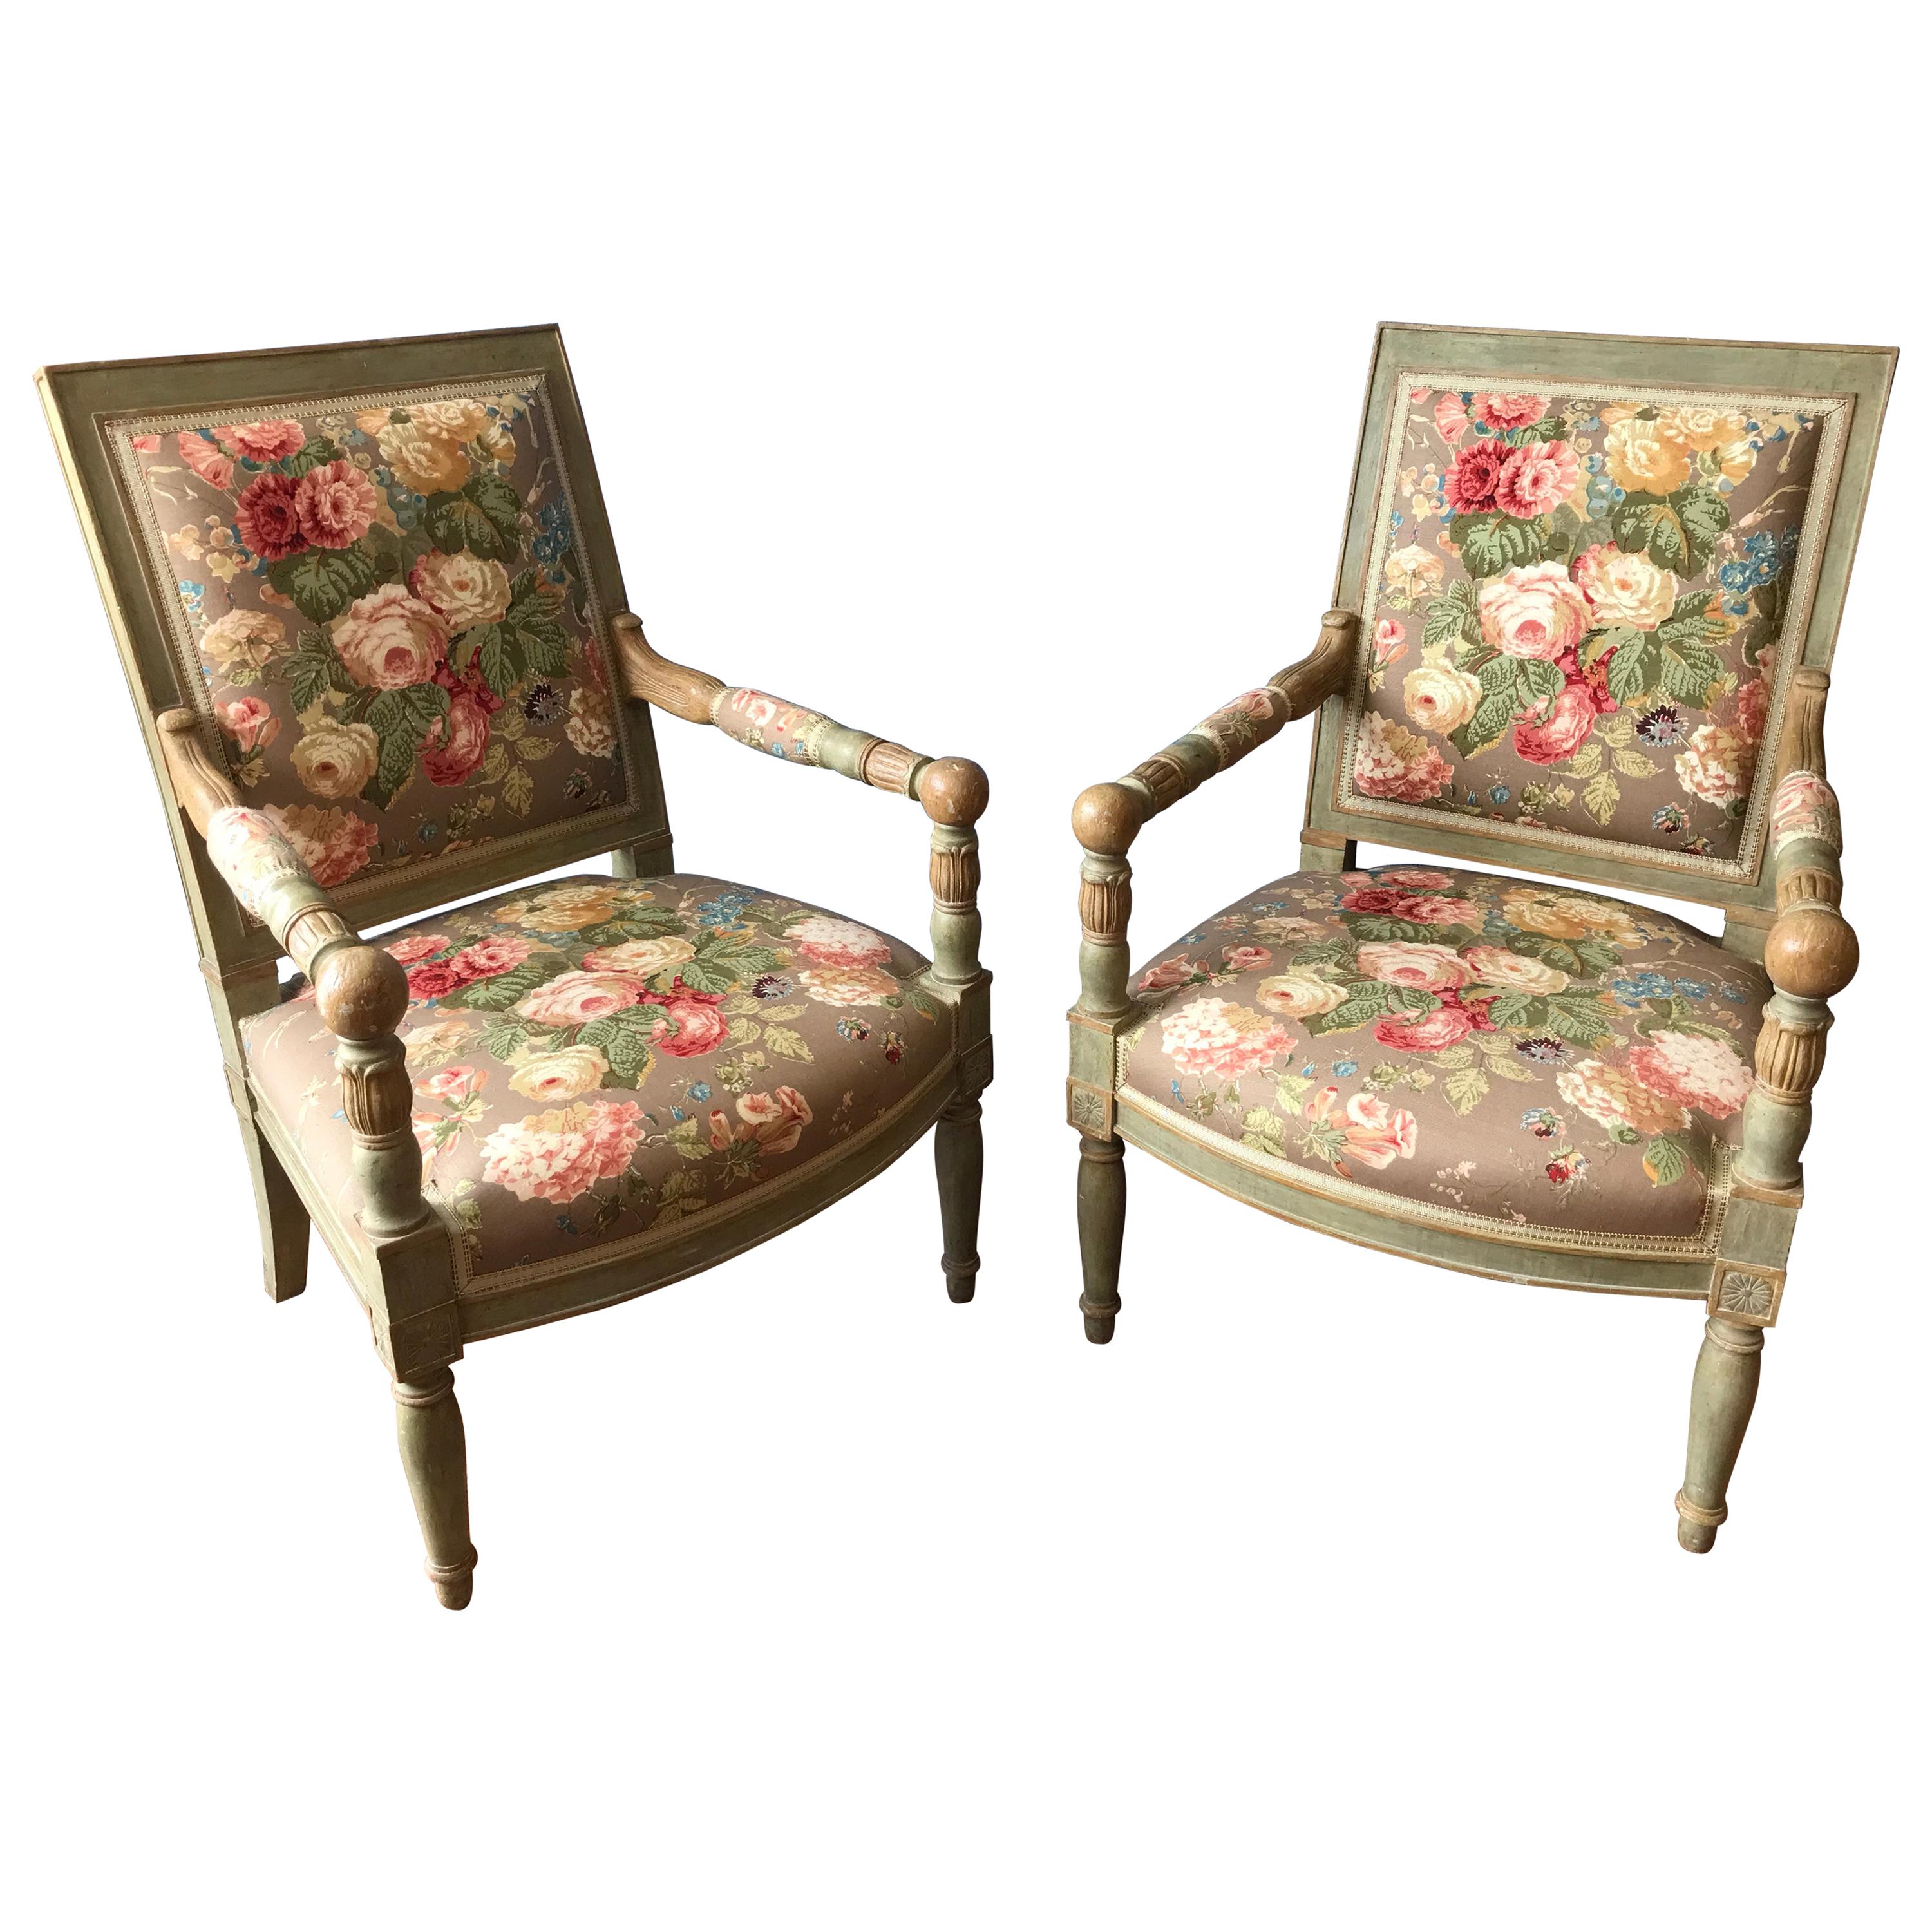 Pair of Continental Open Arm Chairs